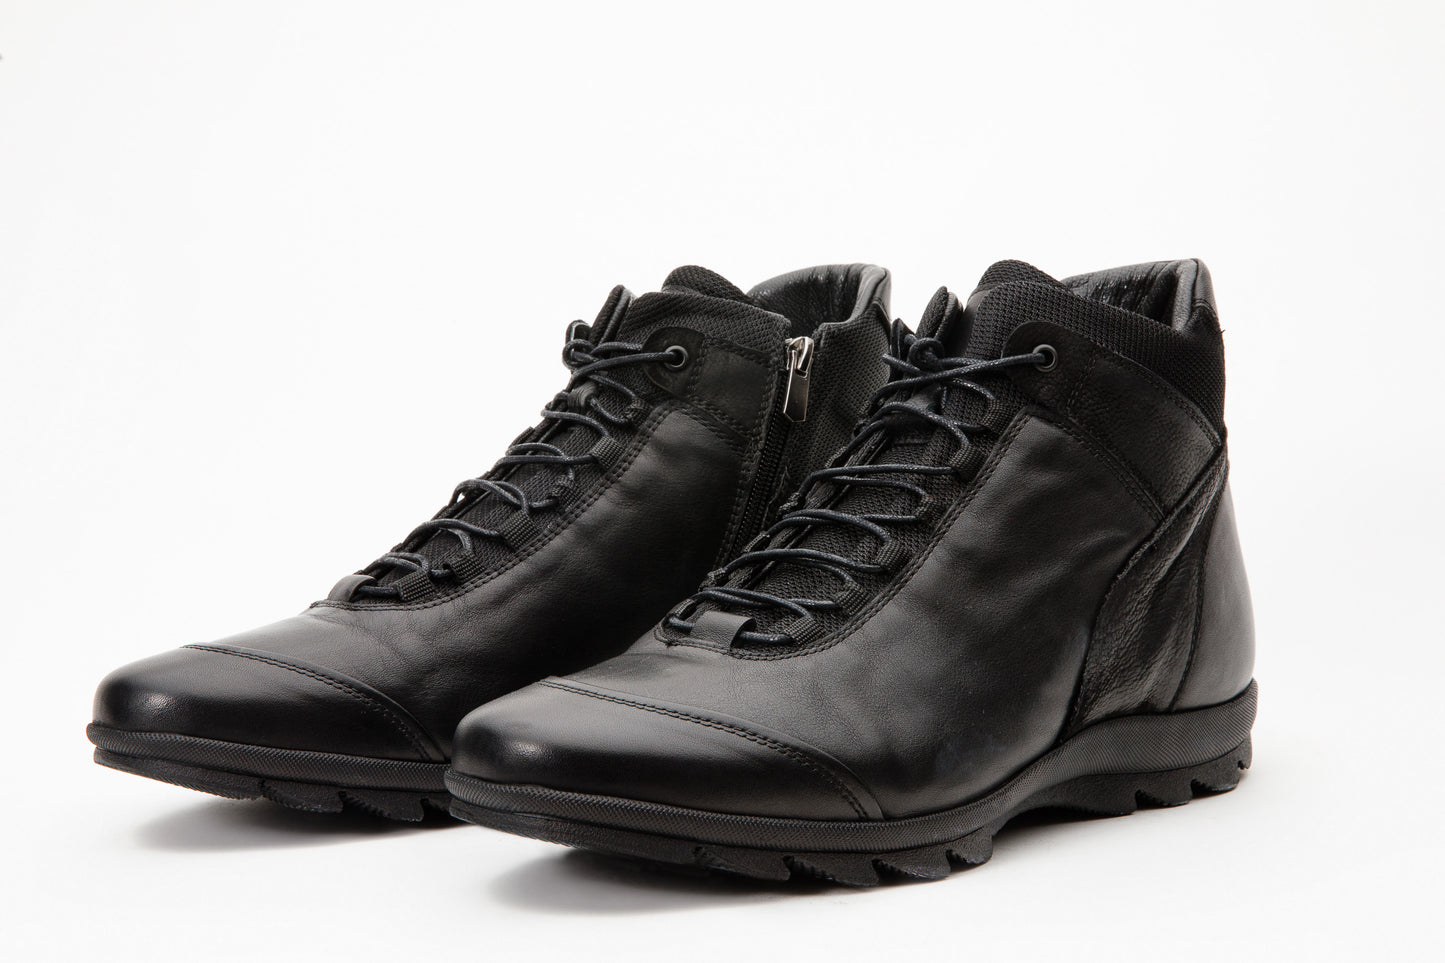 The Houston Leather Black Lace-Up Casual Men Boot with a Zipper